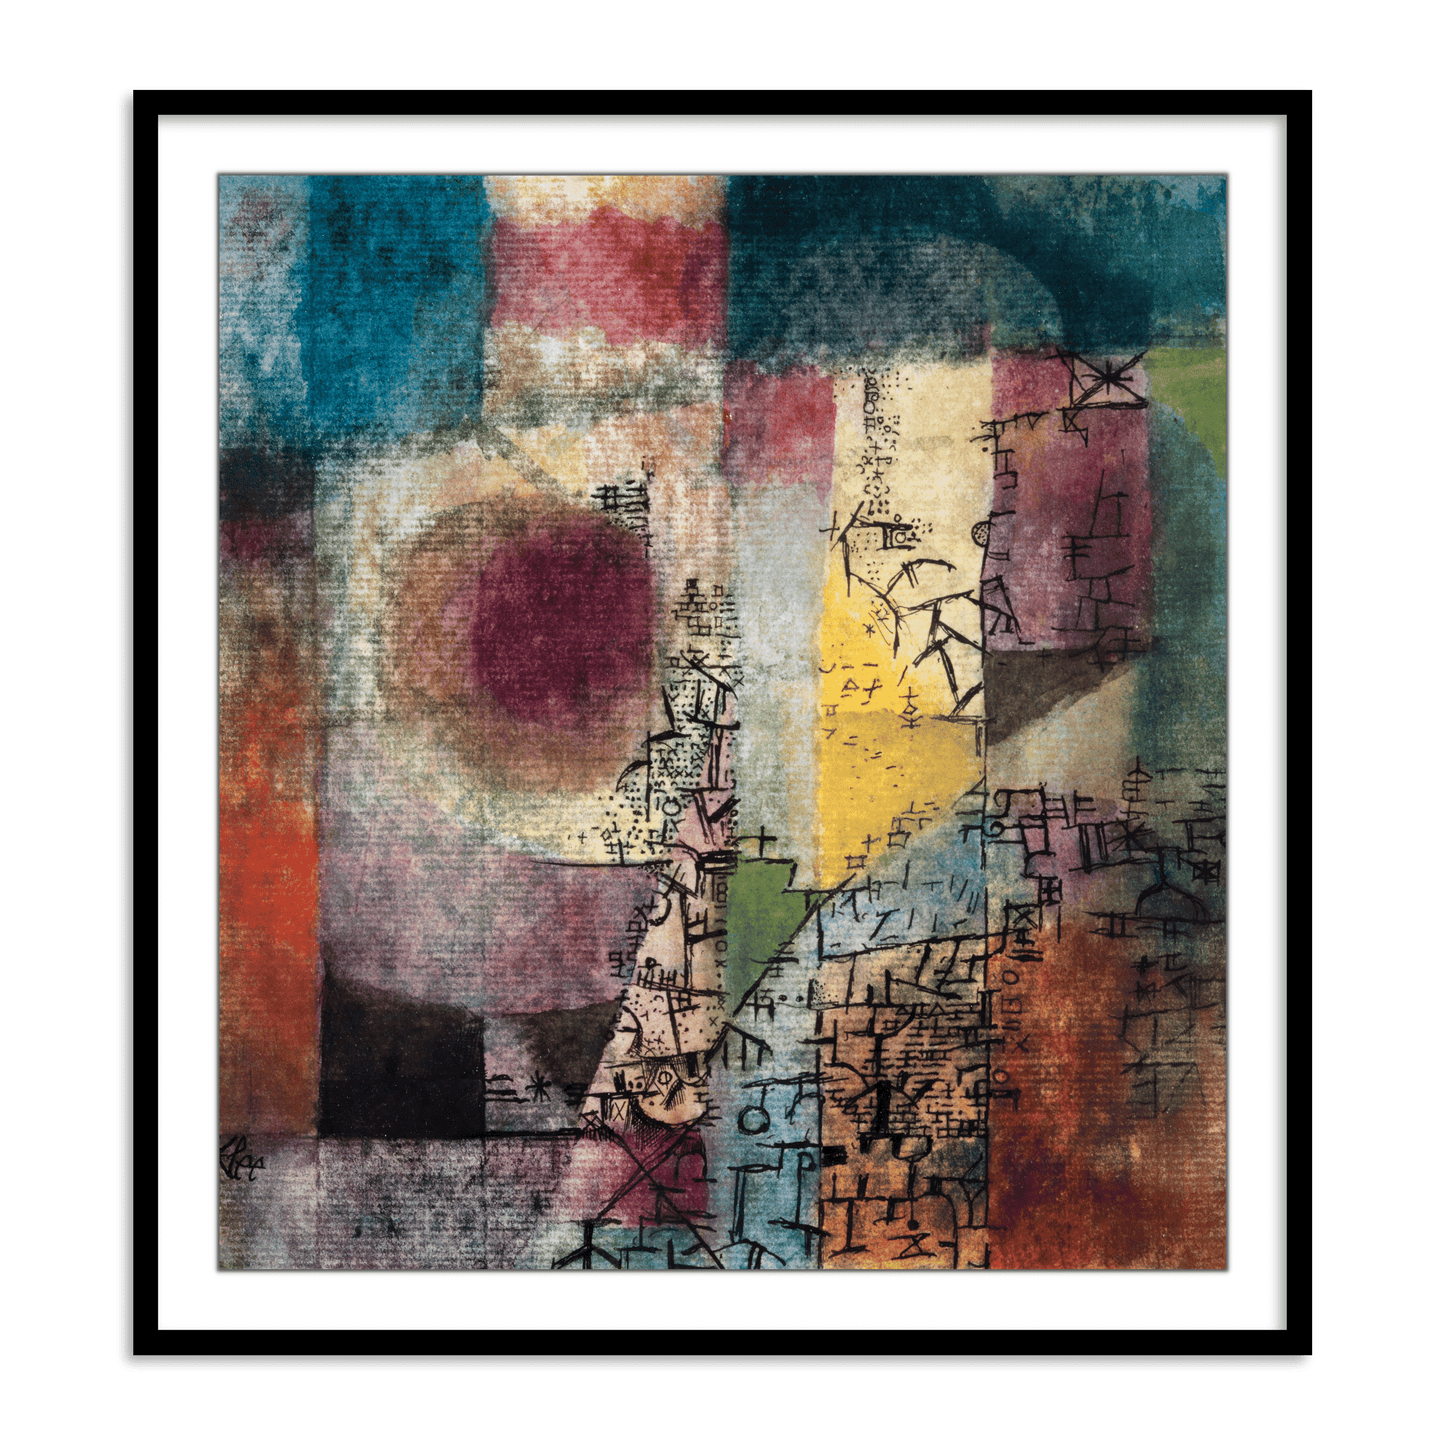 Untitled 1 by Paul Klee